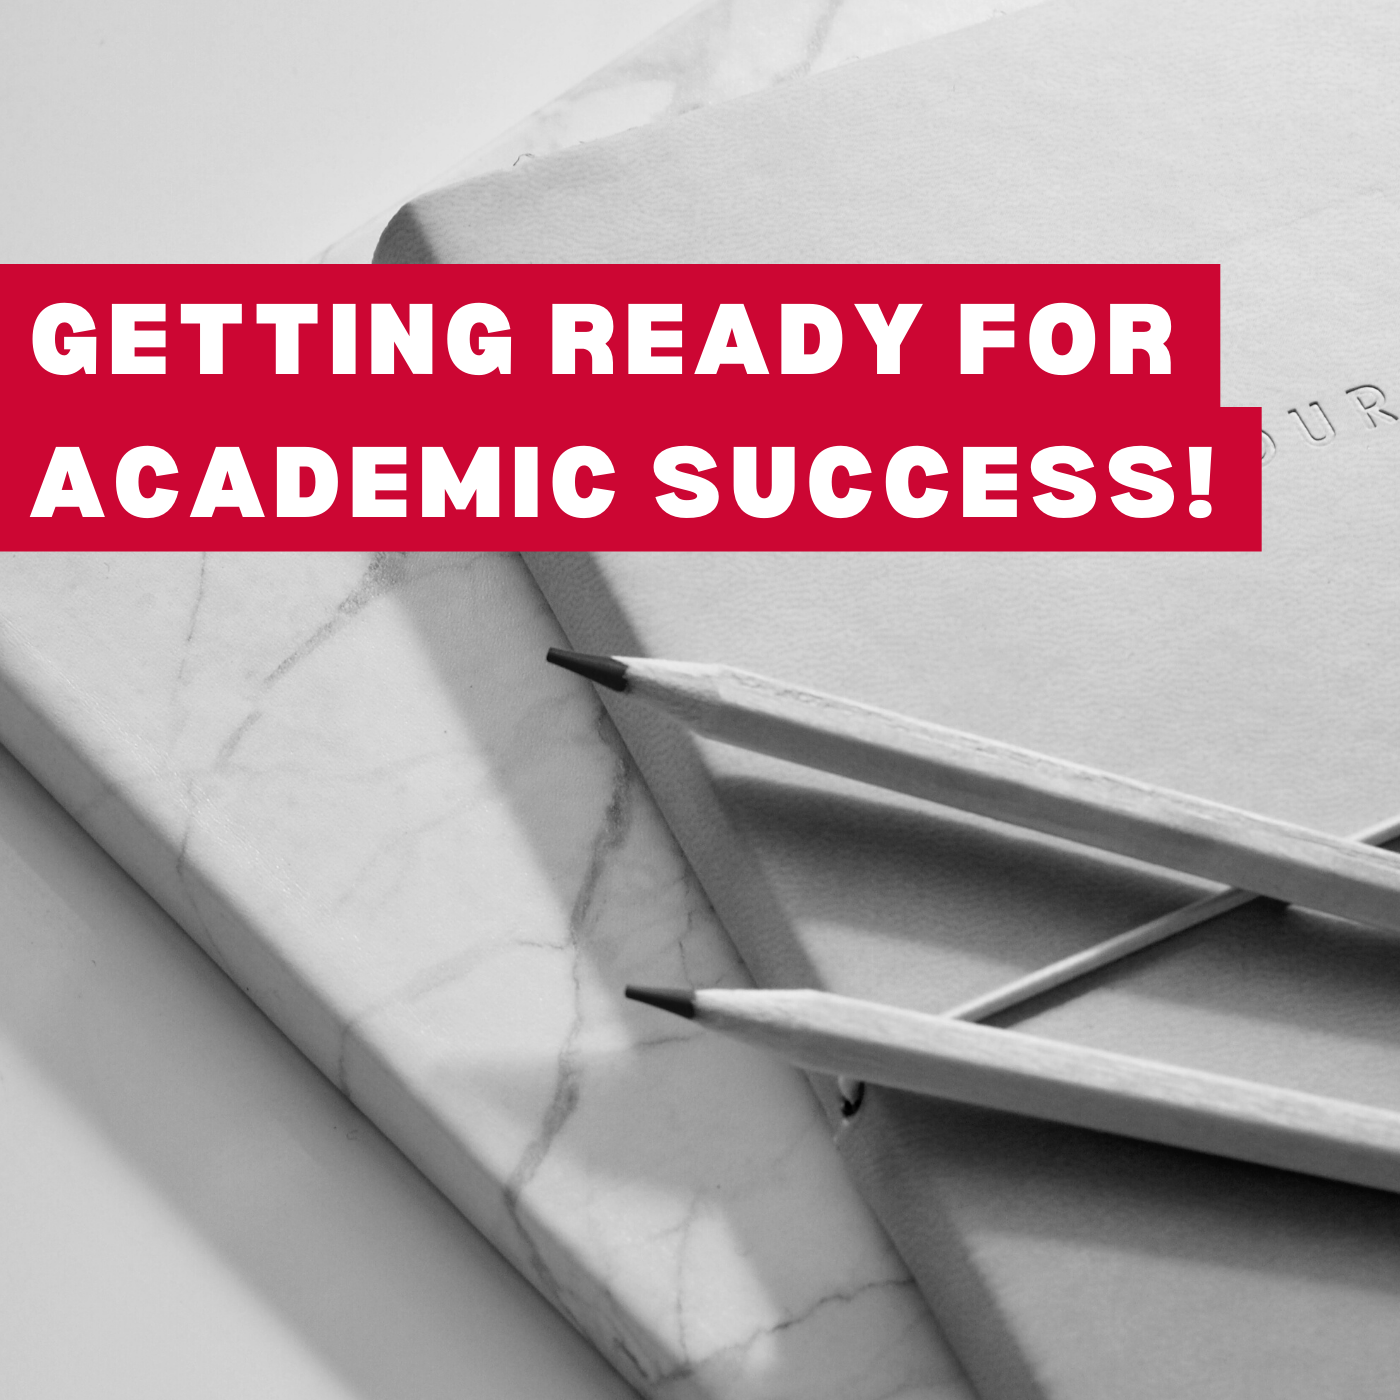 Getting ready for academic success - 1